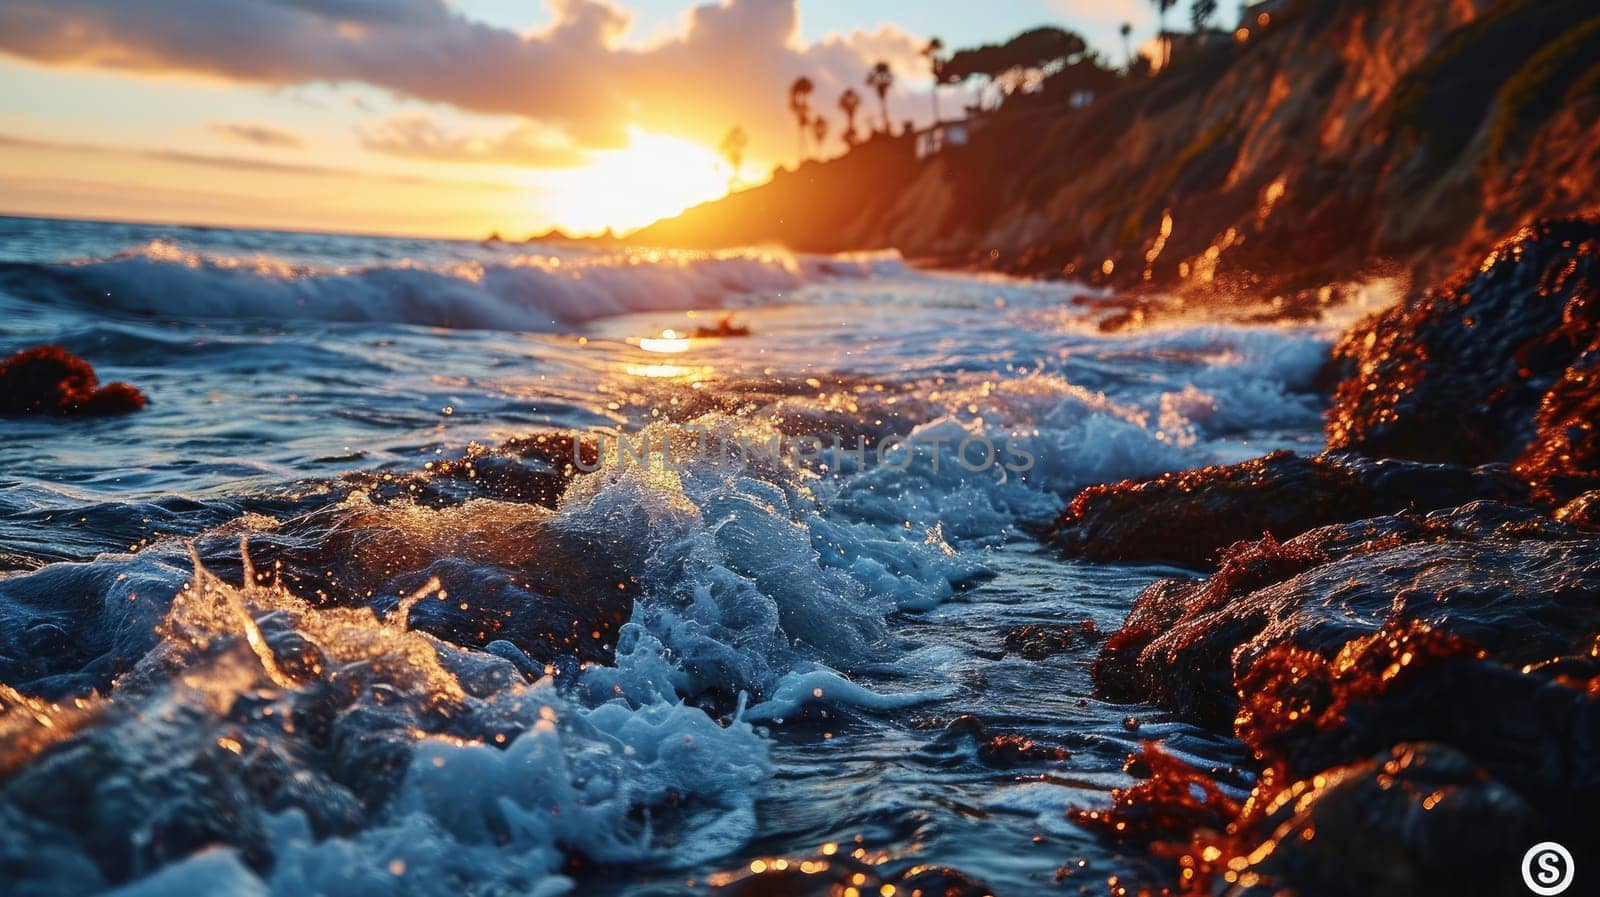 Foamy waves against the background of the sunset create a magical sight by the seashore